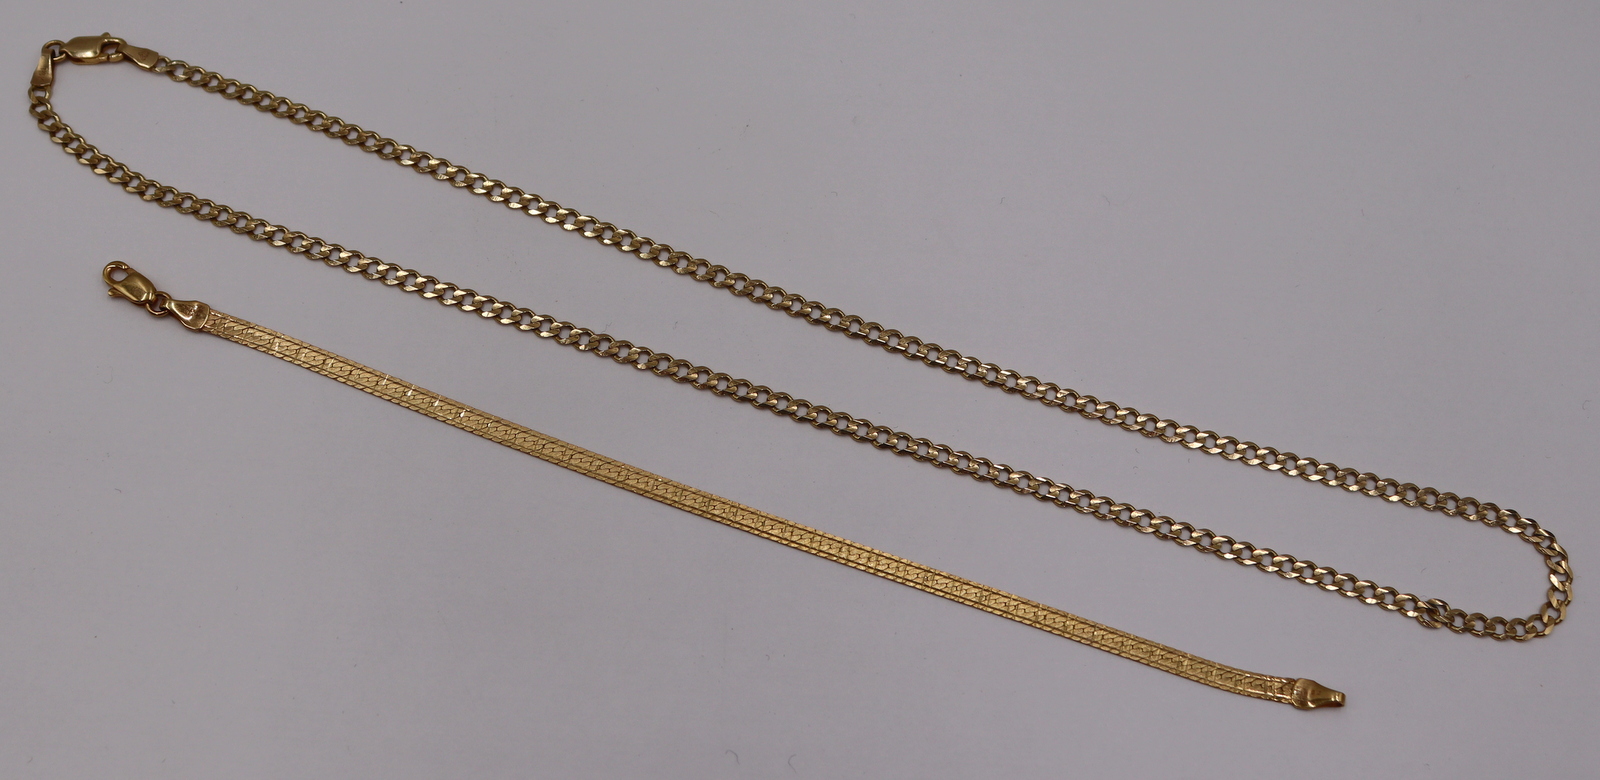 JEWELRY. 14KT GOLD CHAIN GROUPING.